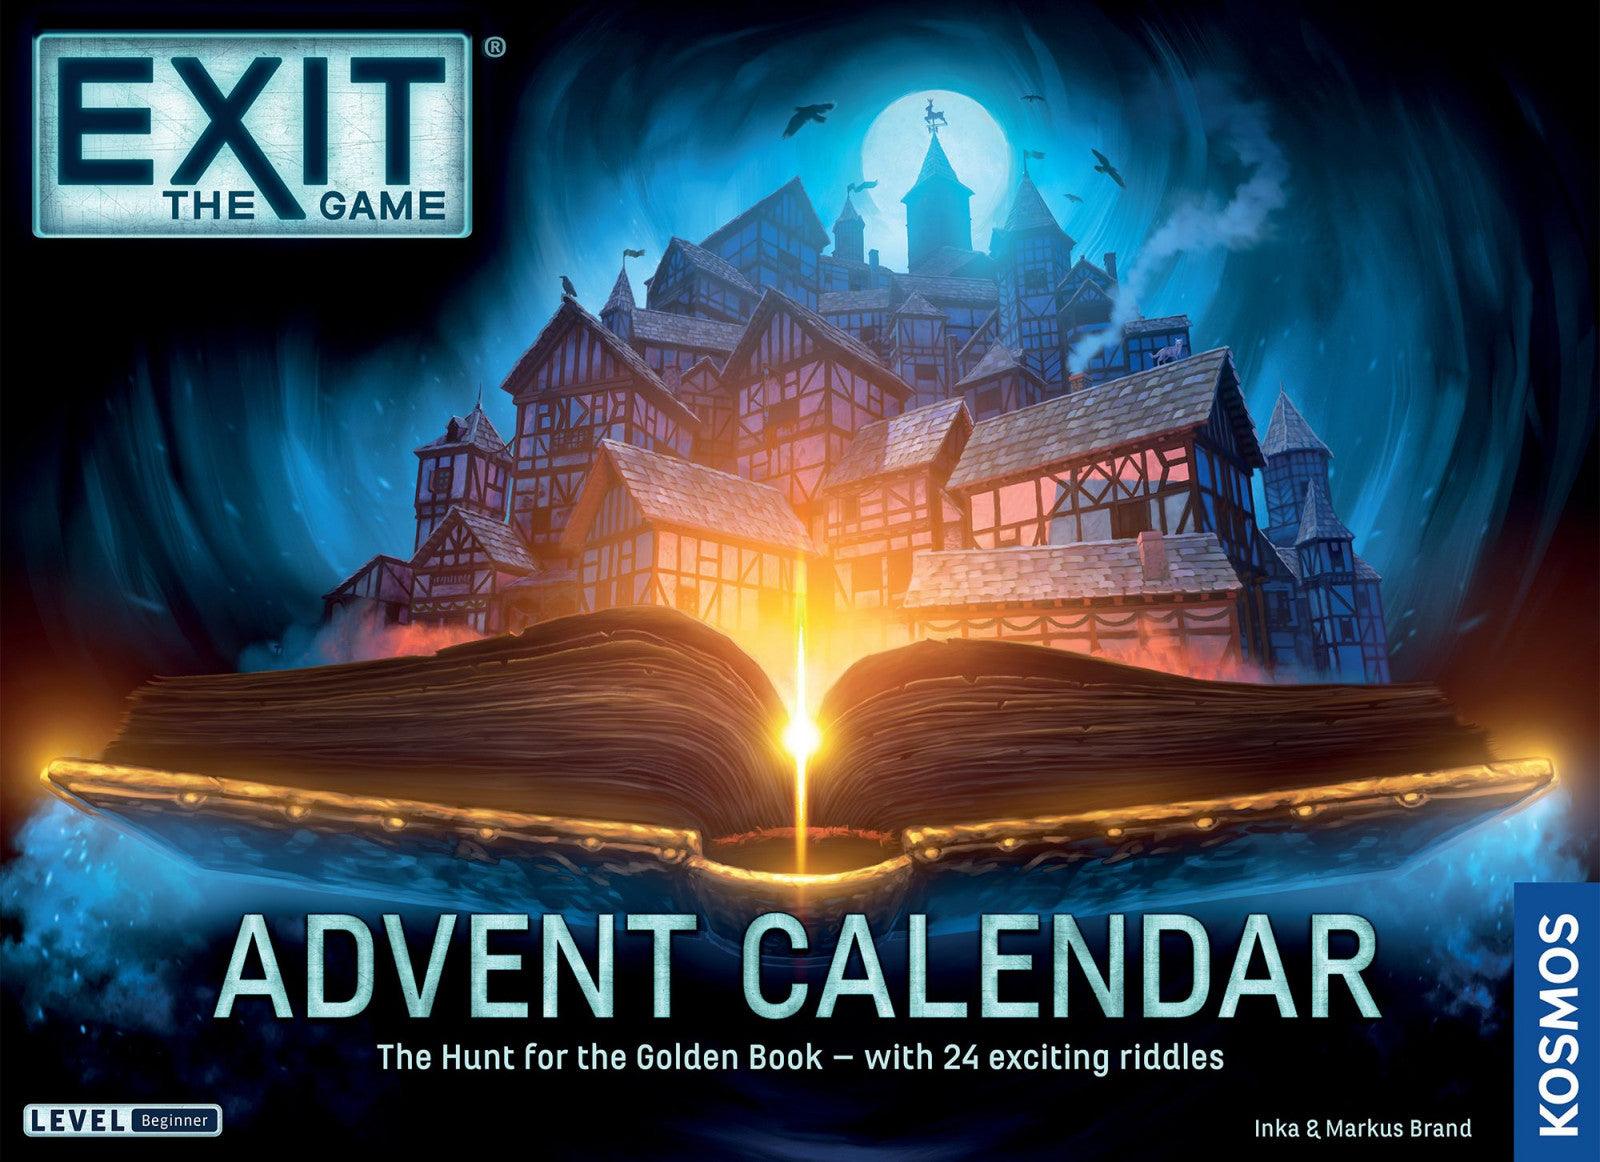 VR-95802 Exit the Game Advent Calendar - The Hunt For The Golden Book - Kosmos - Titan Pop Culture